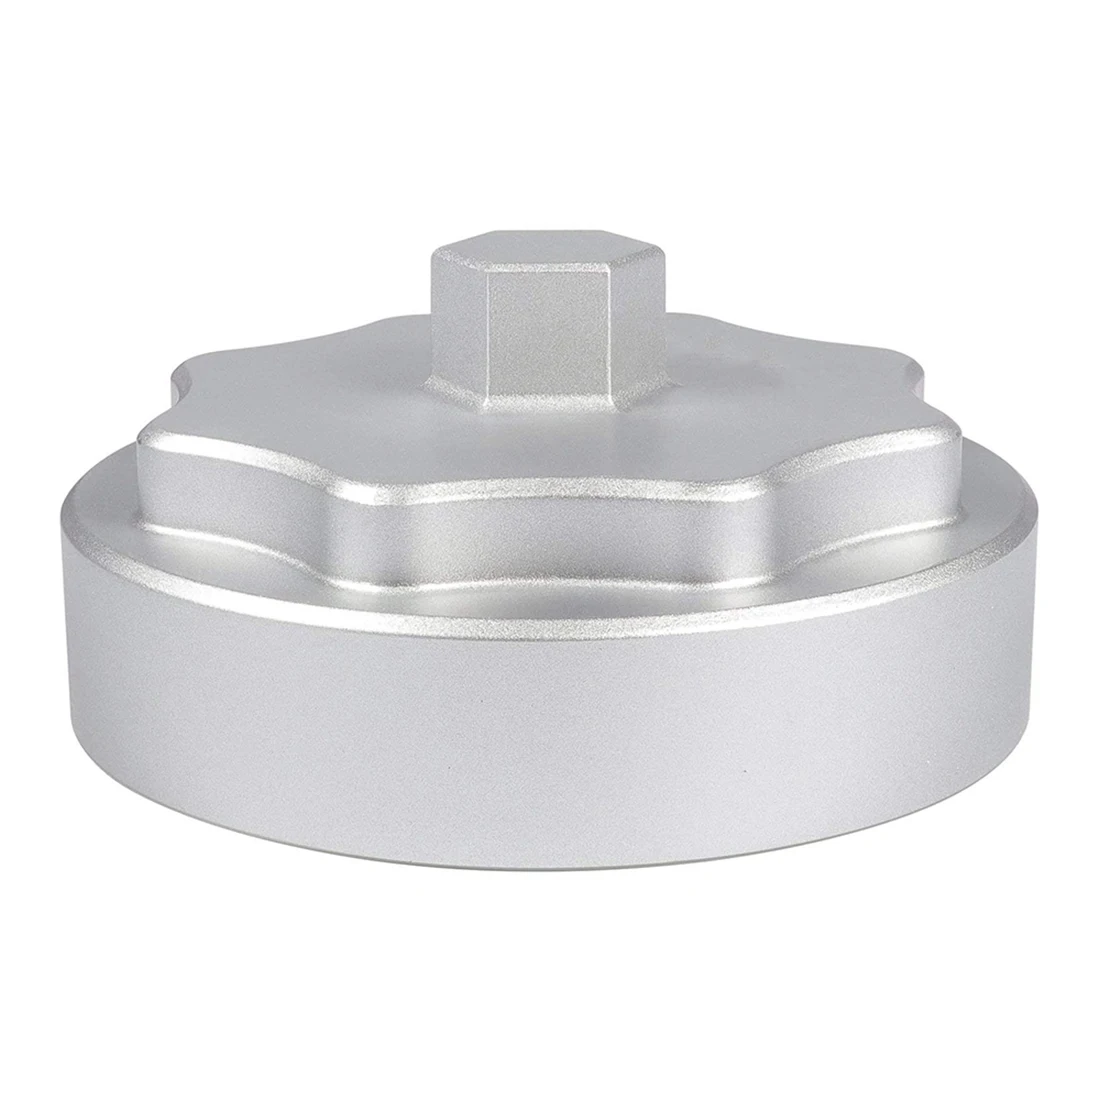 

68065612AA Fuel Filter Housing Cover Cap Replacement for Ram 6.7L 2500 3500 4500 5500 2010-2019 Engine Billet